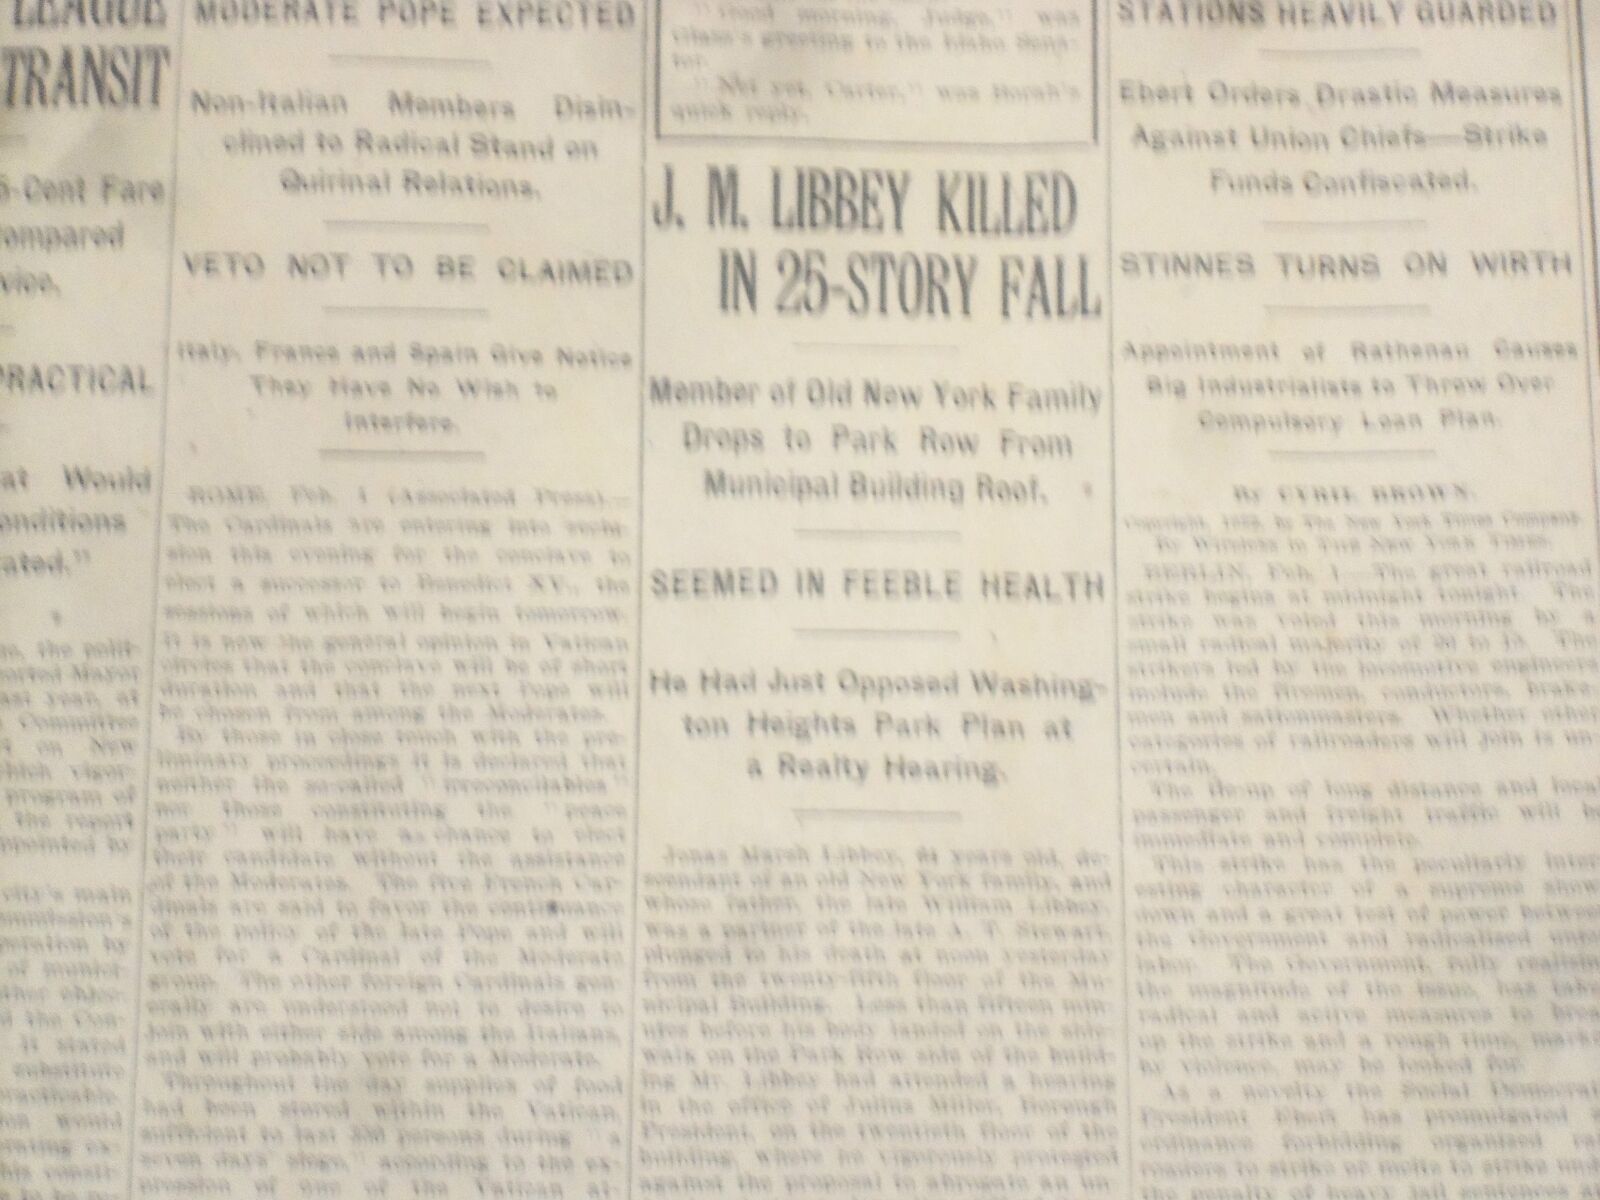 1922 FEBRUARY 2 NEW YORK TIMES - J.M. LIBBEY KILLED IN 25 STORY FALL - NT 9000